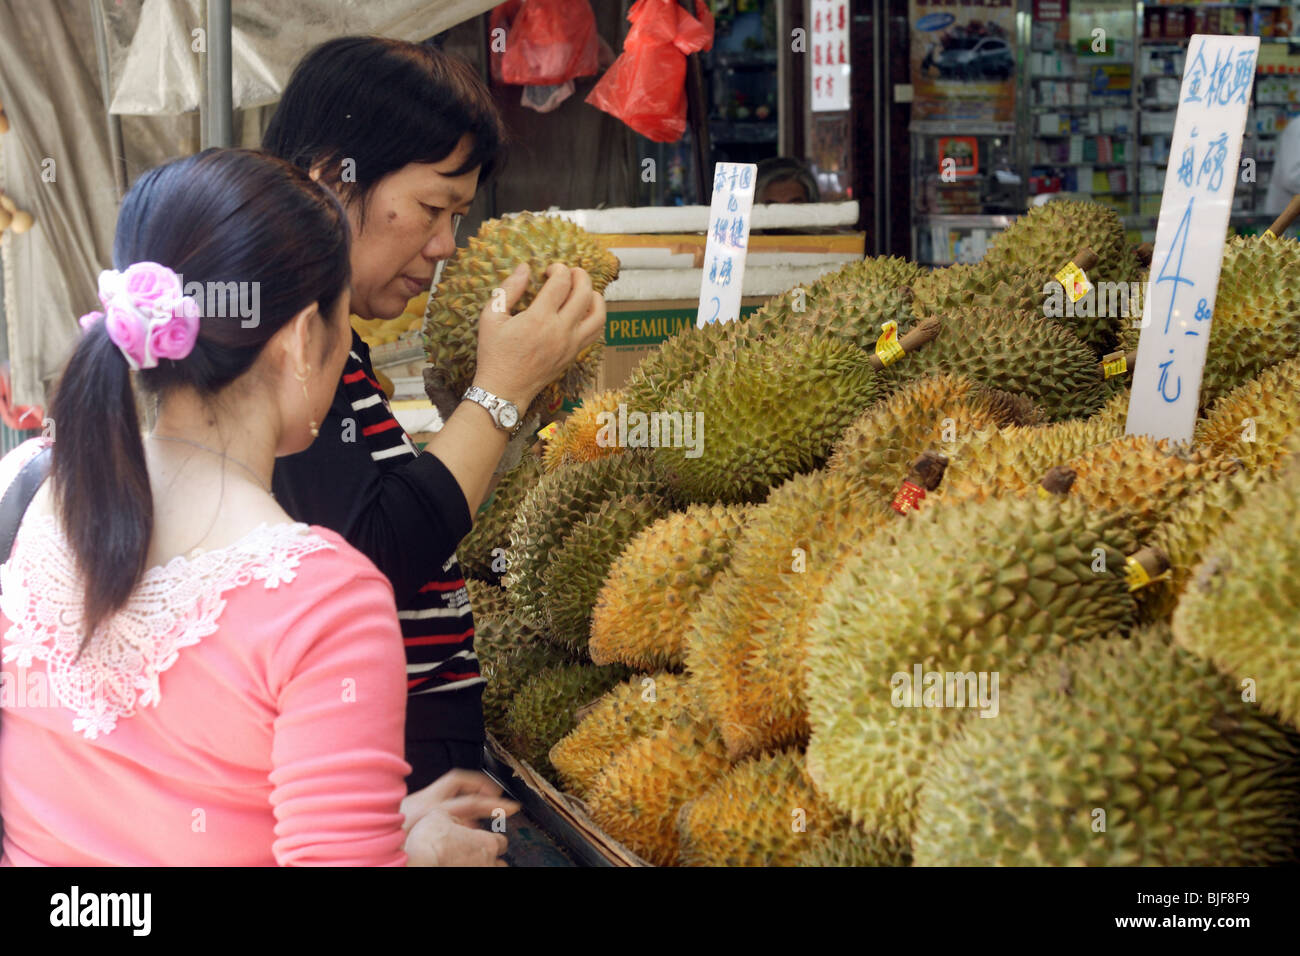 Woman smells a durian fruit, Macao, China Stock Photo